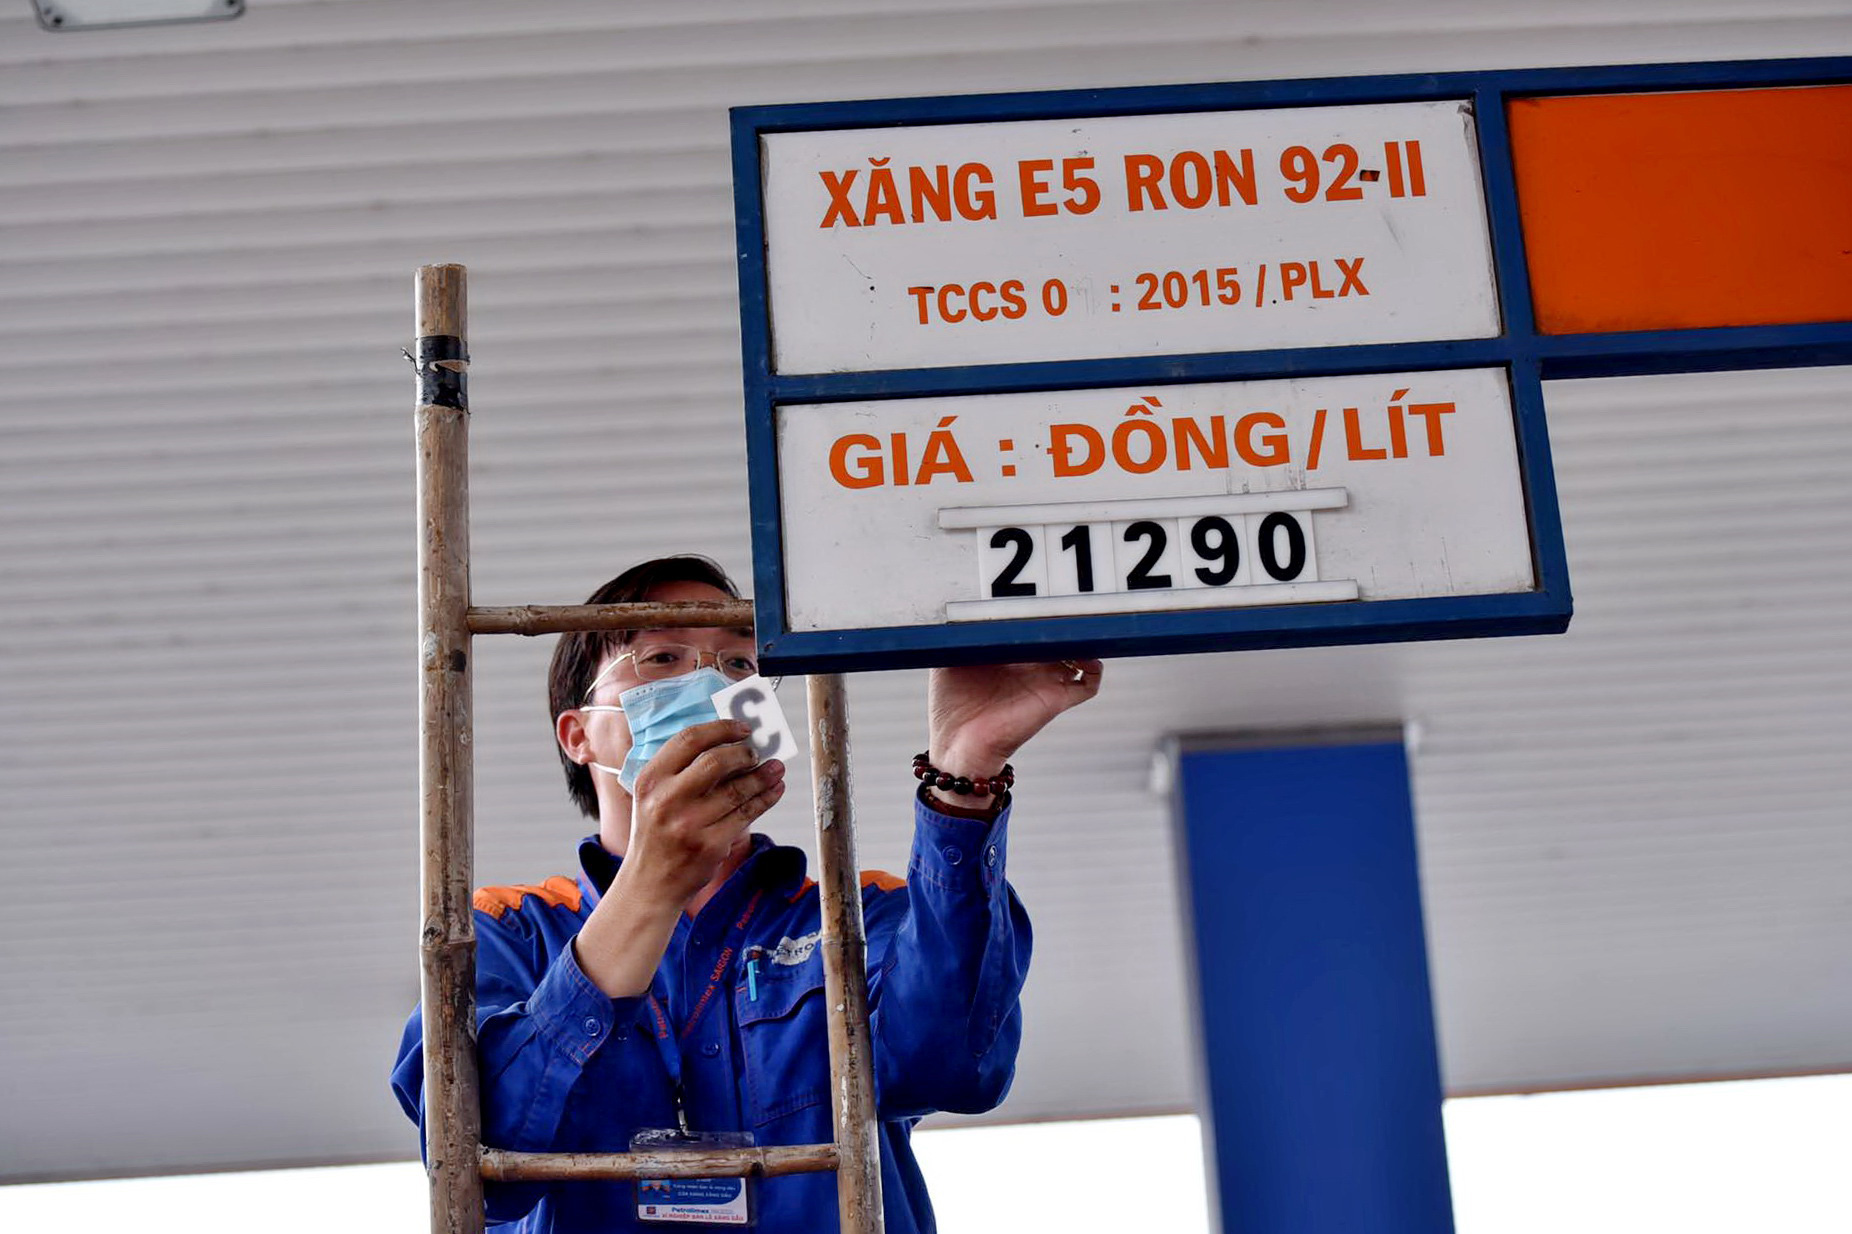 Vietnam petrol prices up after four previous decreases